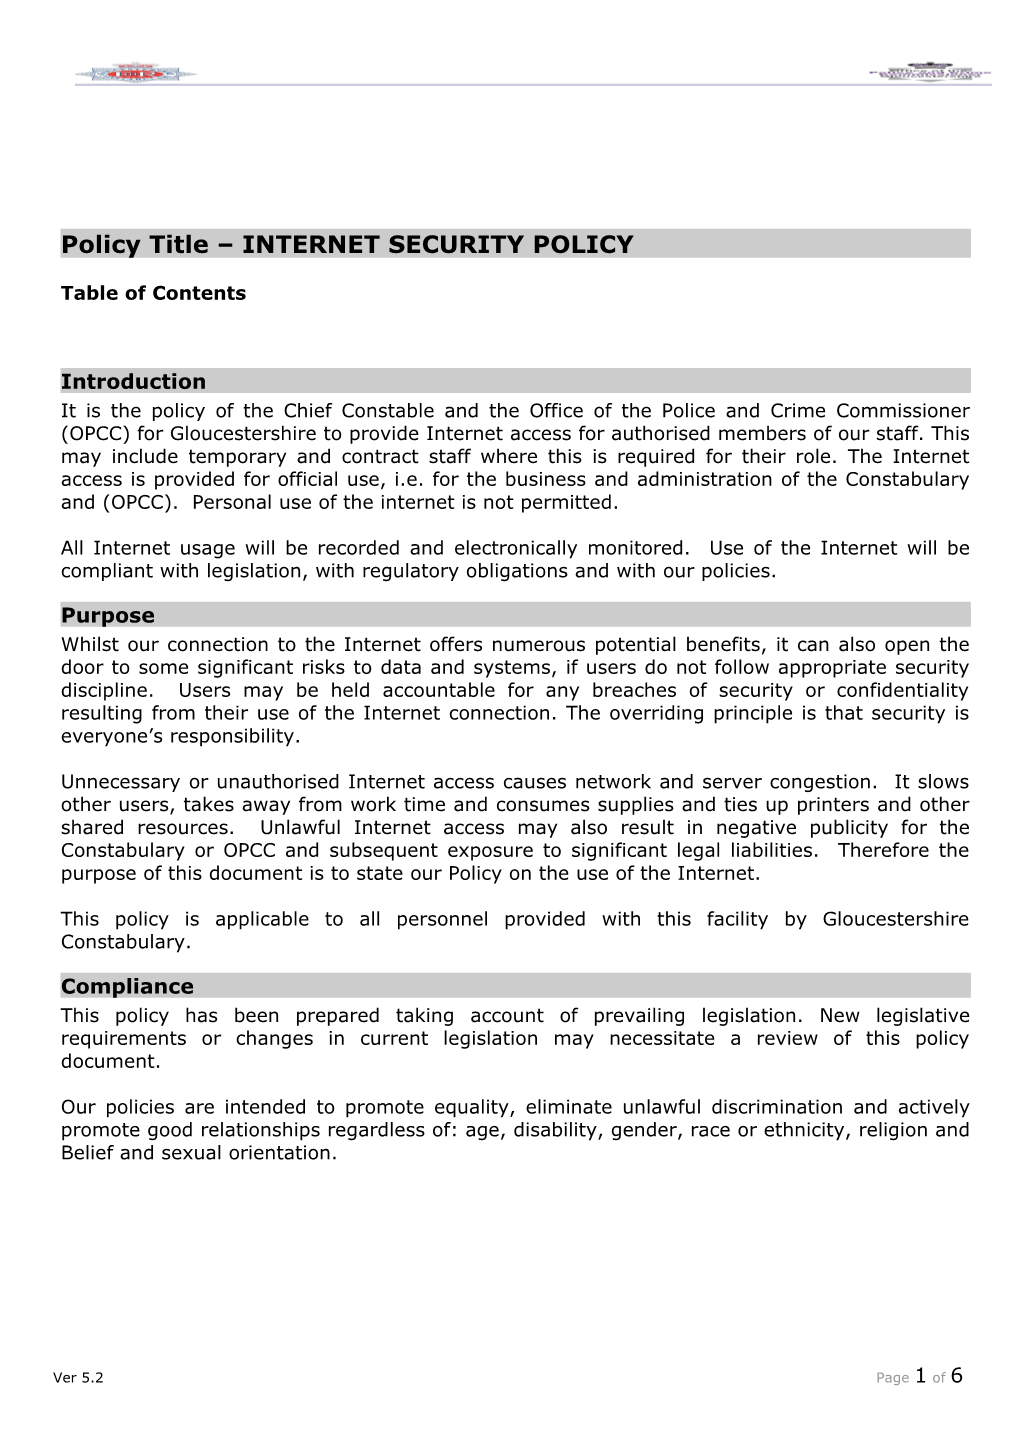 Policy Title INTERNET SECURITY POLICY